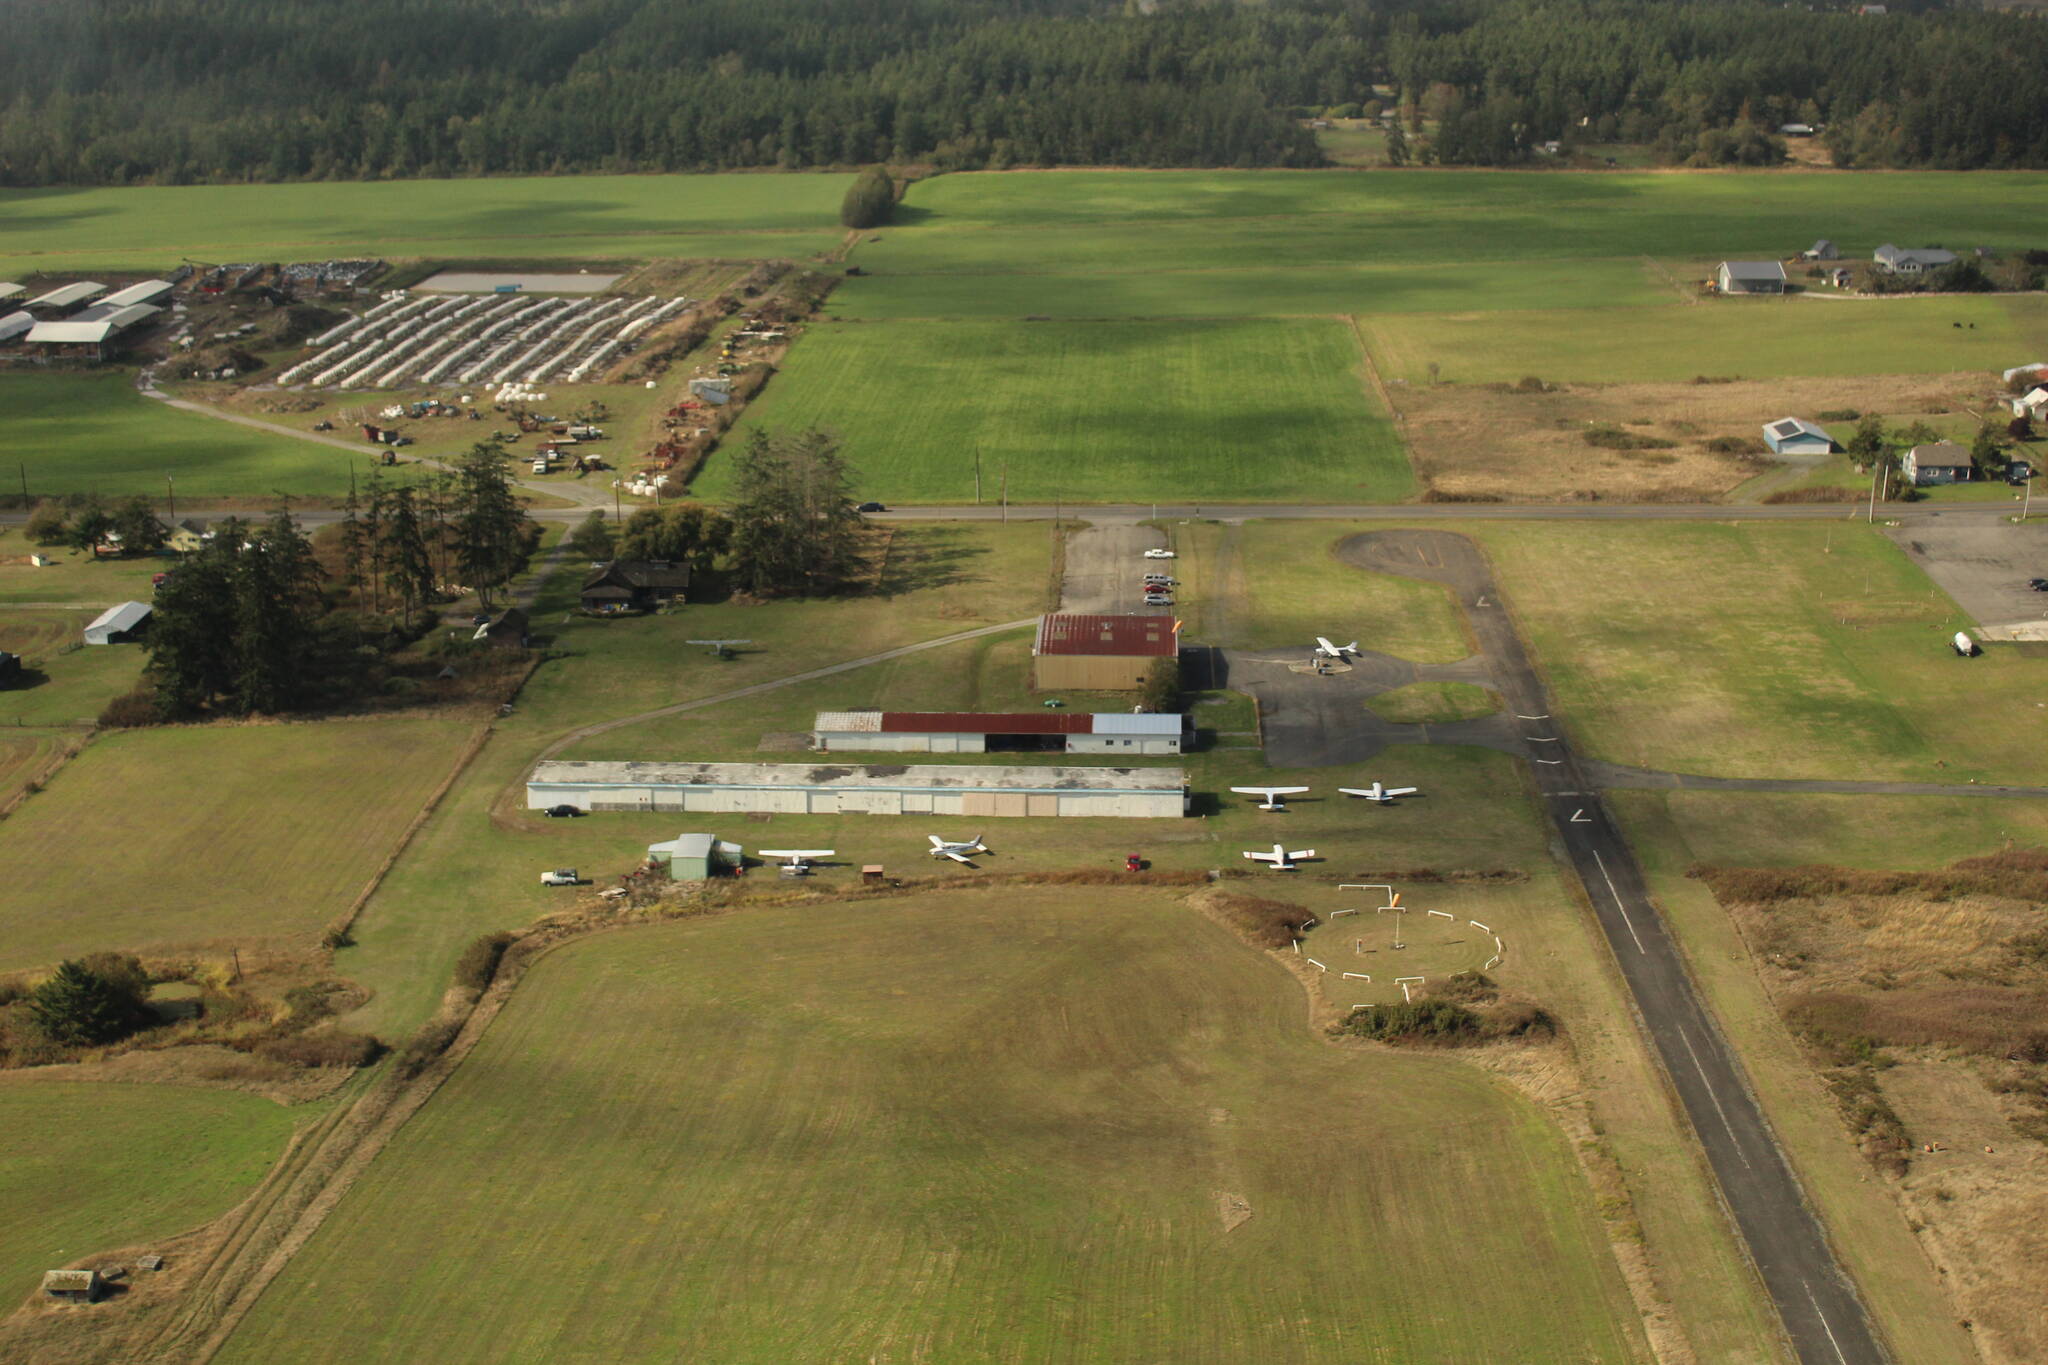 The A. J. Eisenberg airport currently offers charter flights, fuel sales, flight instruction and private sight-seeing. (Photo by Karina Andrew/Whidbey News-Times)